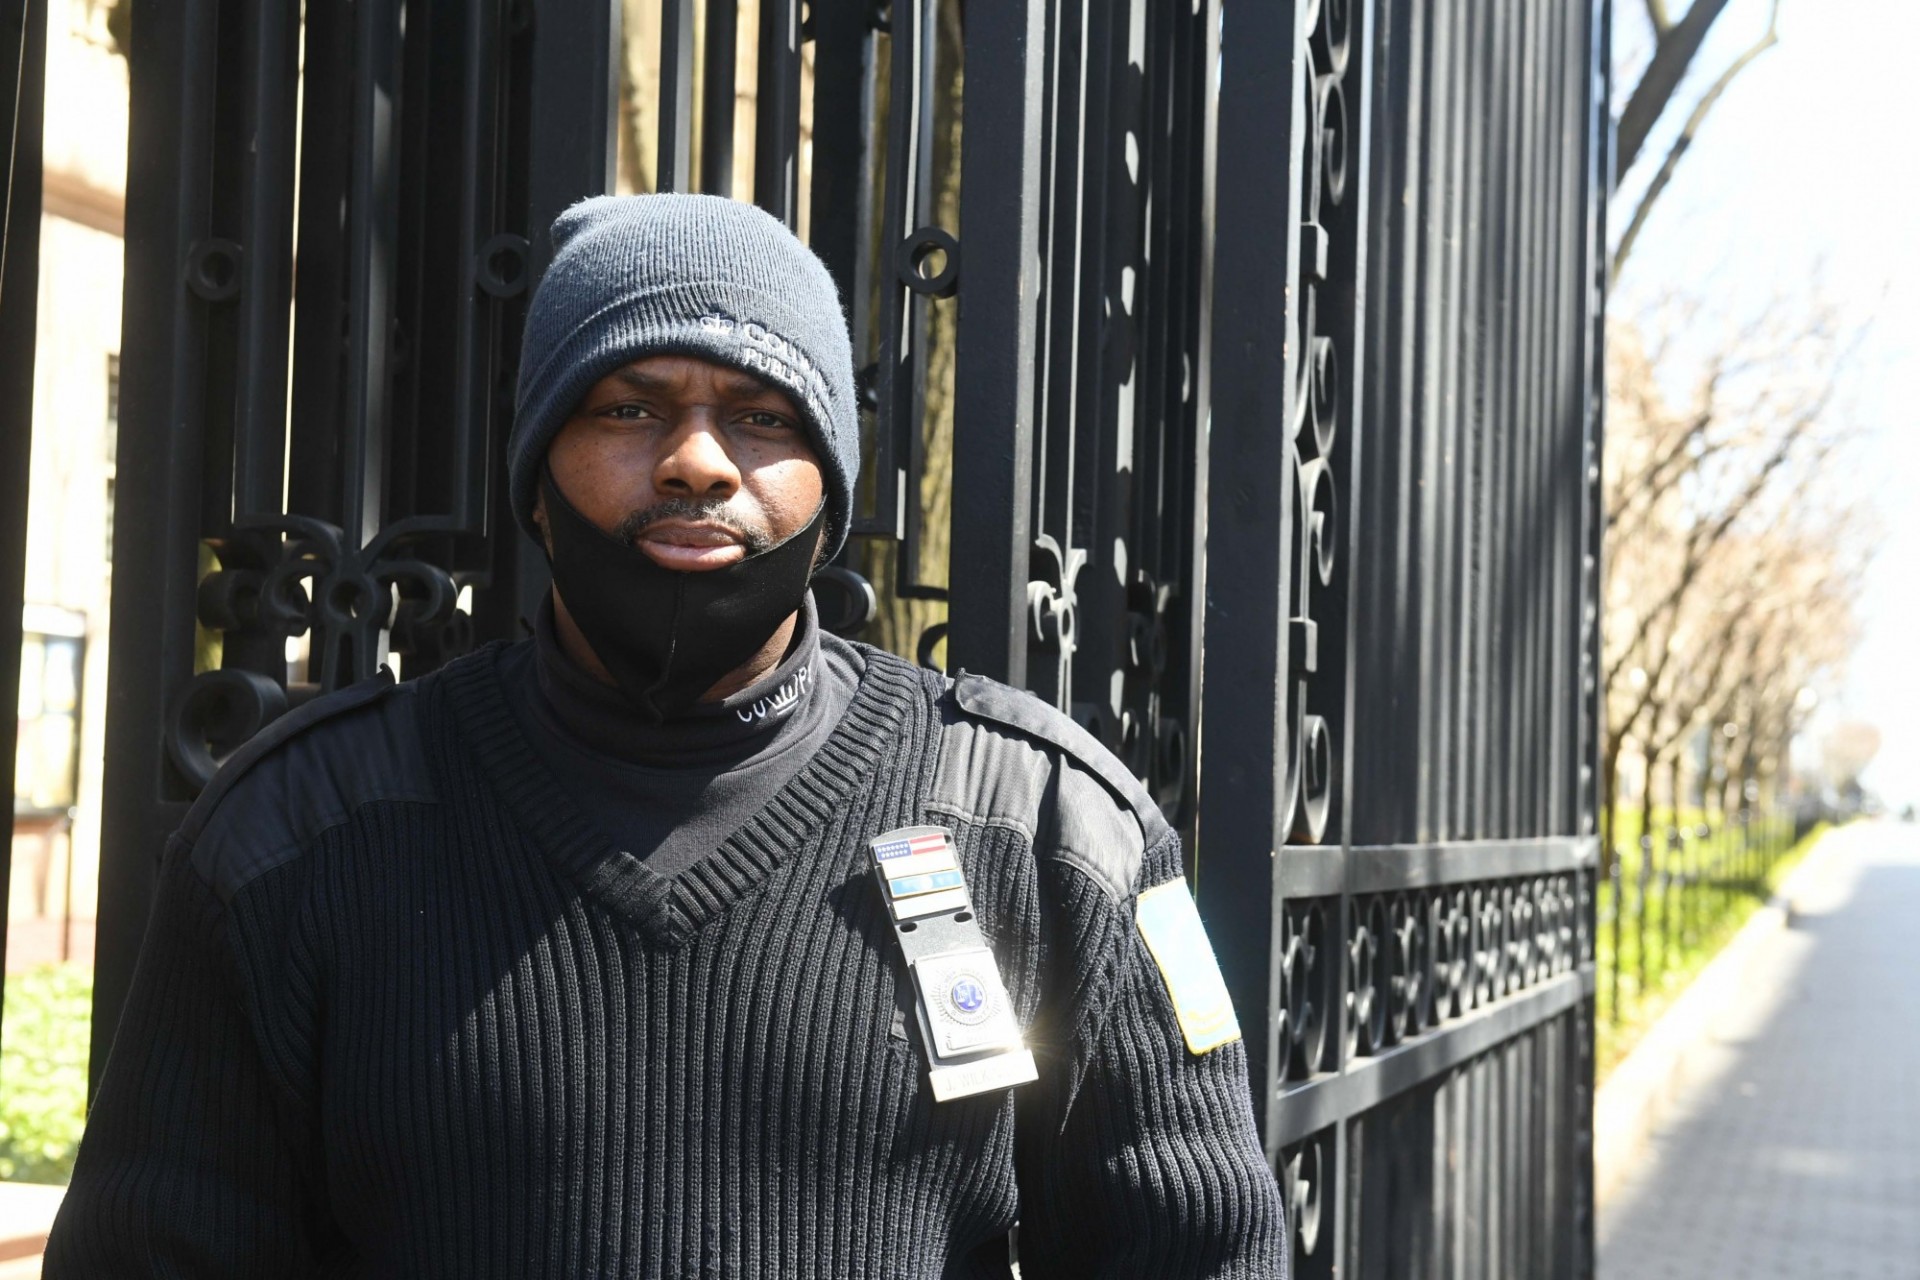 A man wearing a blue beanie and black sweater is standing in front of Columbia's College Walk gates. His black mask is pulled down, revealing his mouth.